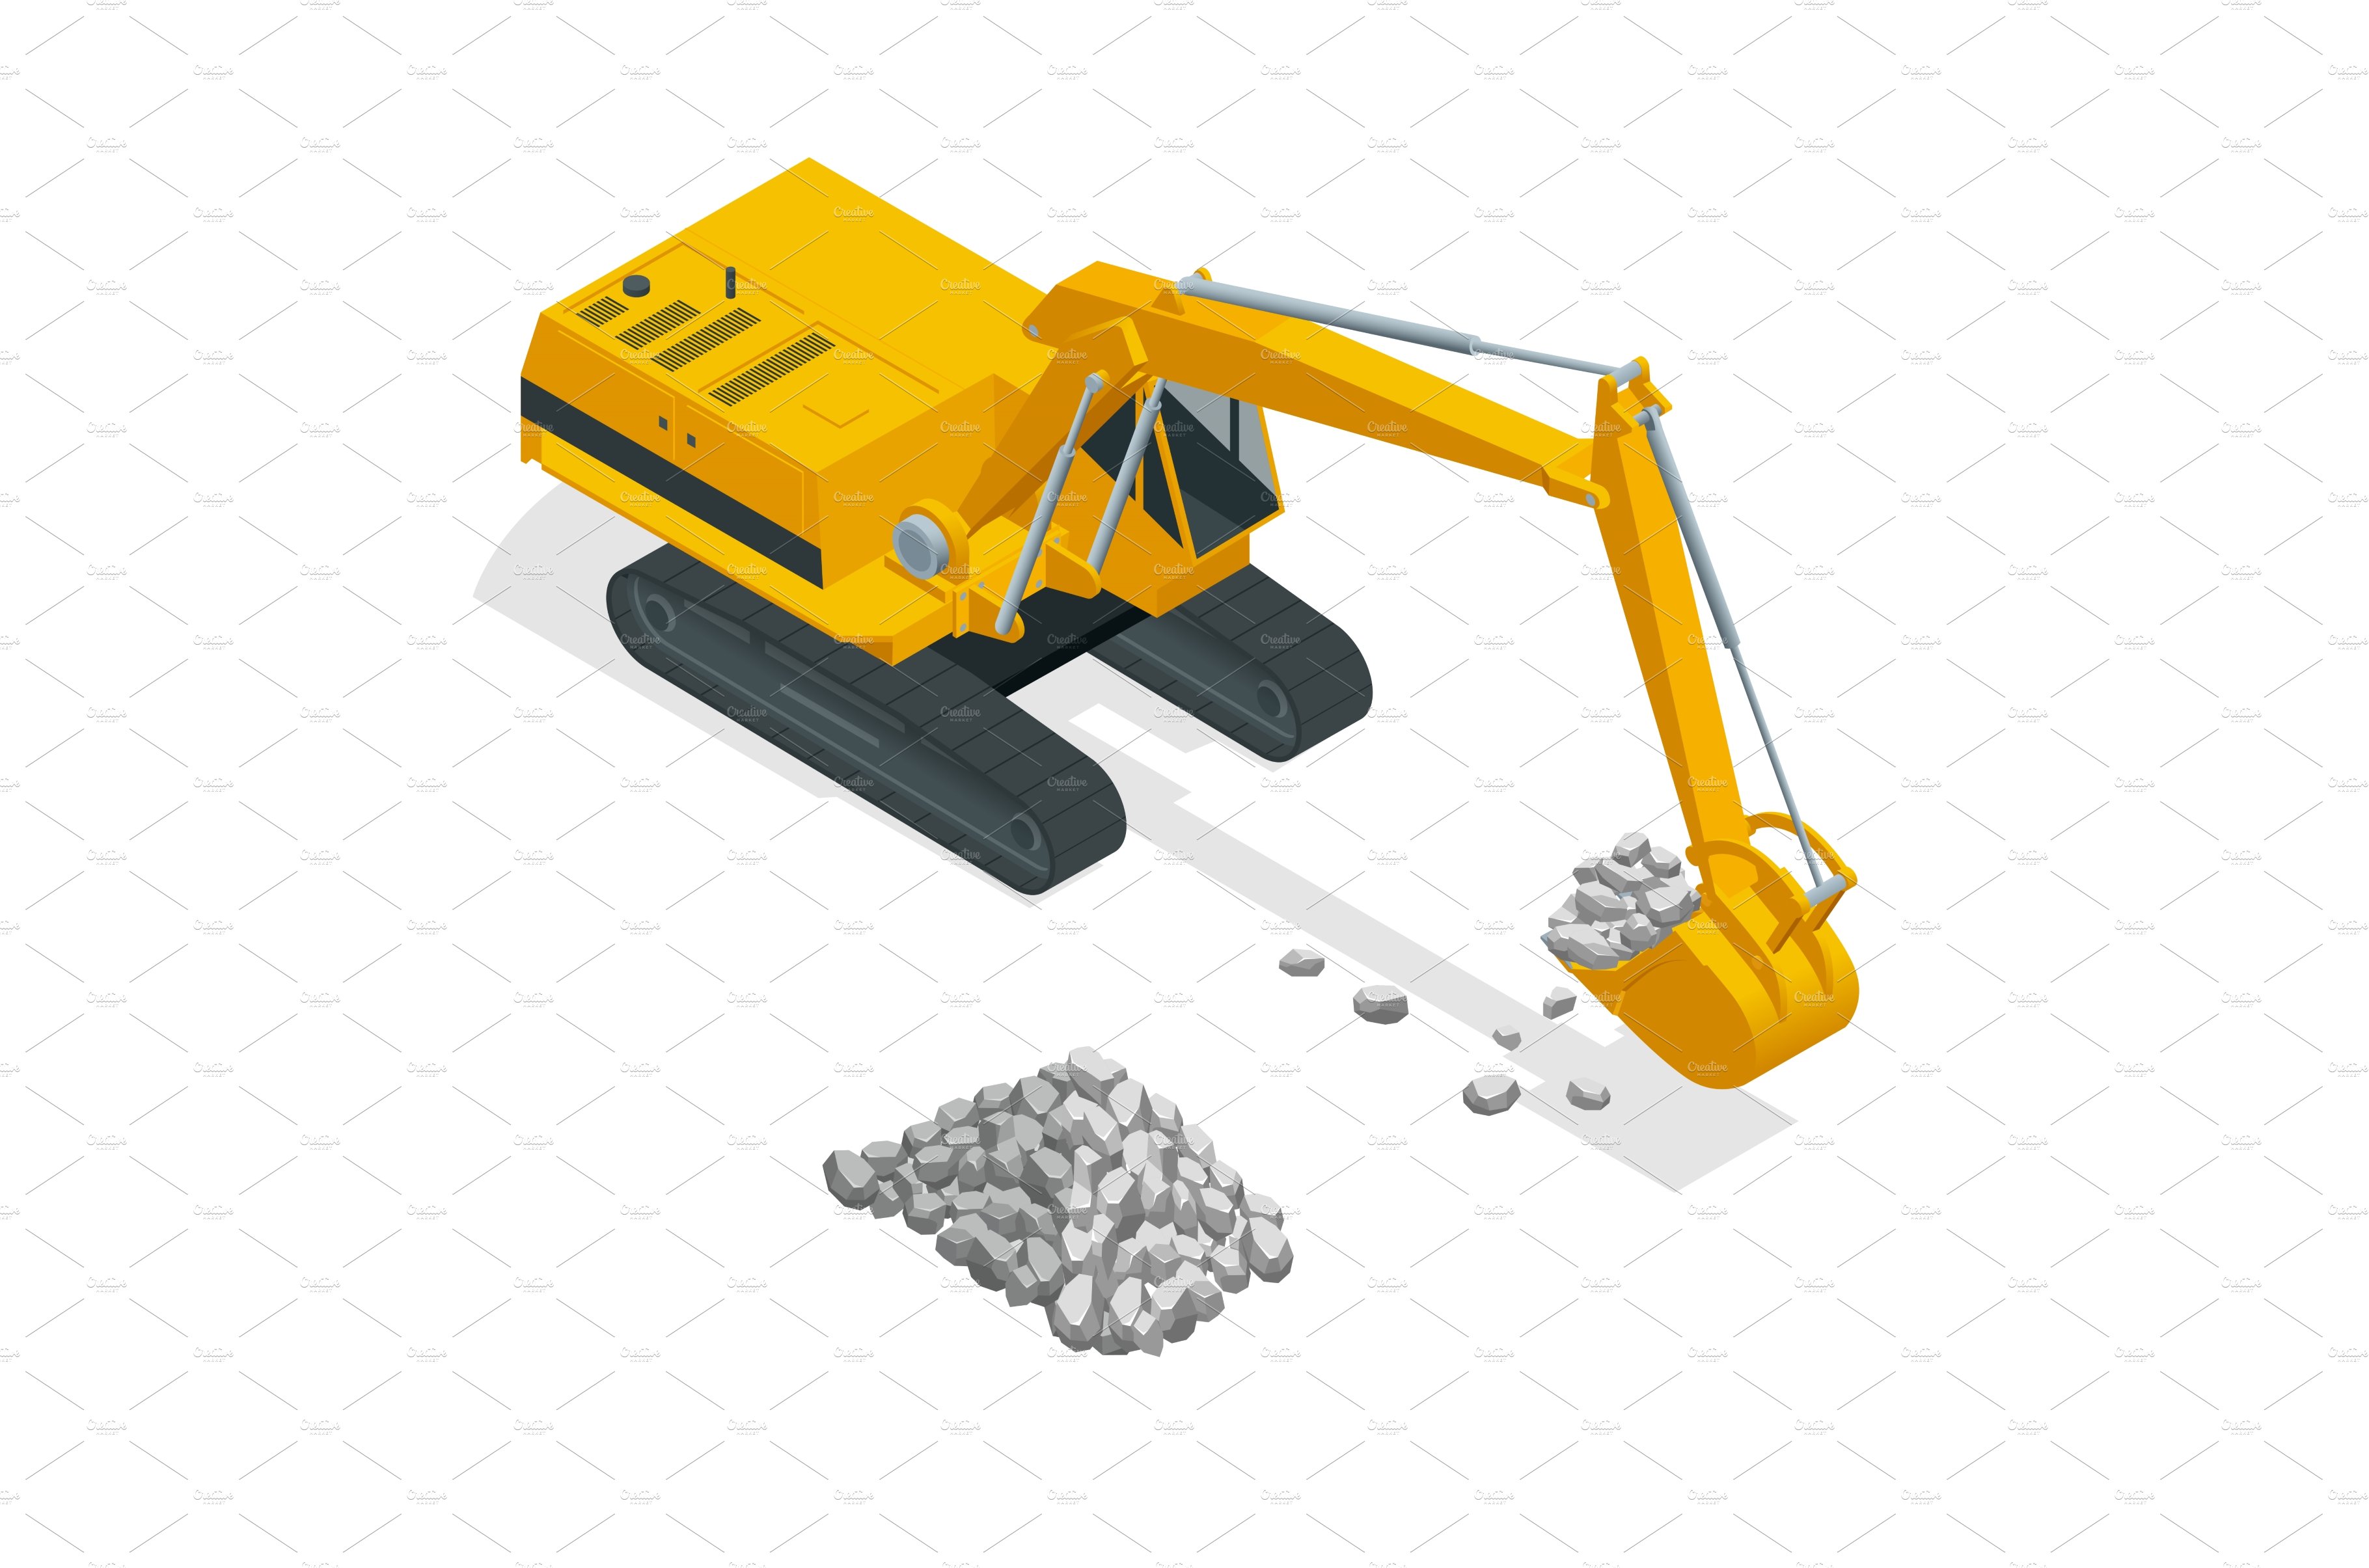 Excavator with Bucket lift up are cover image.